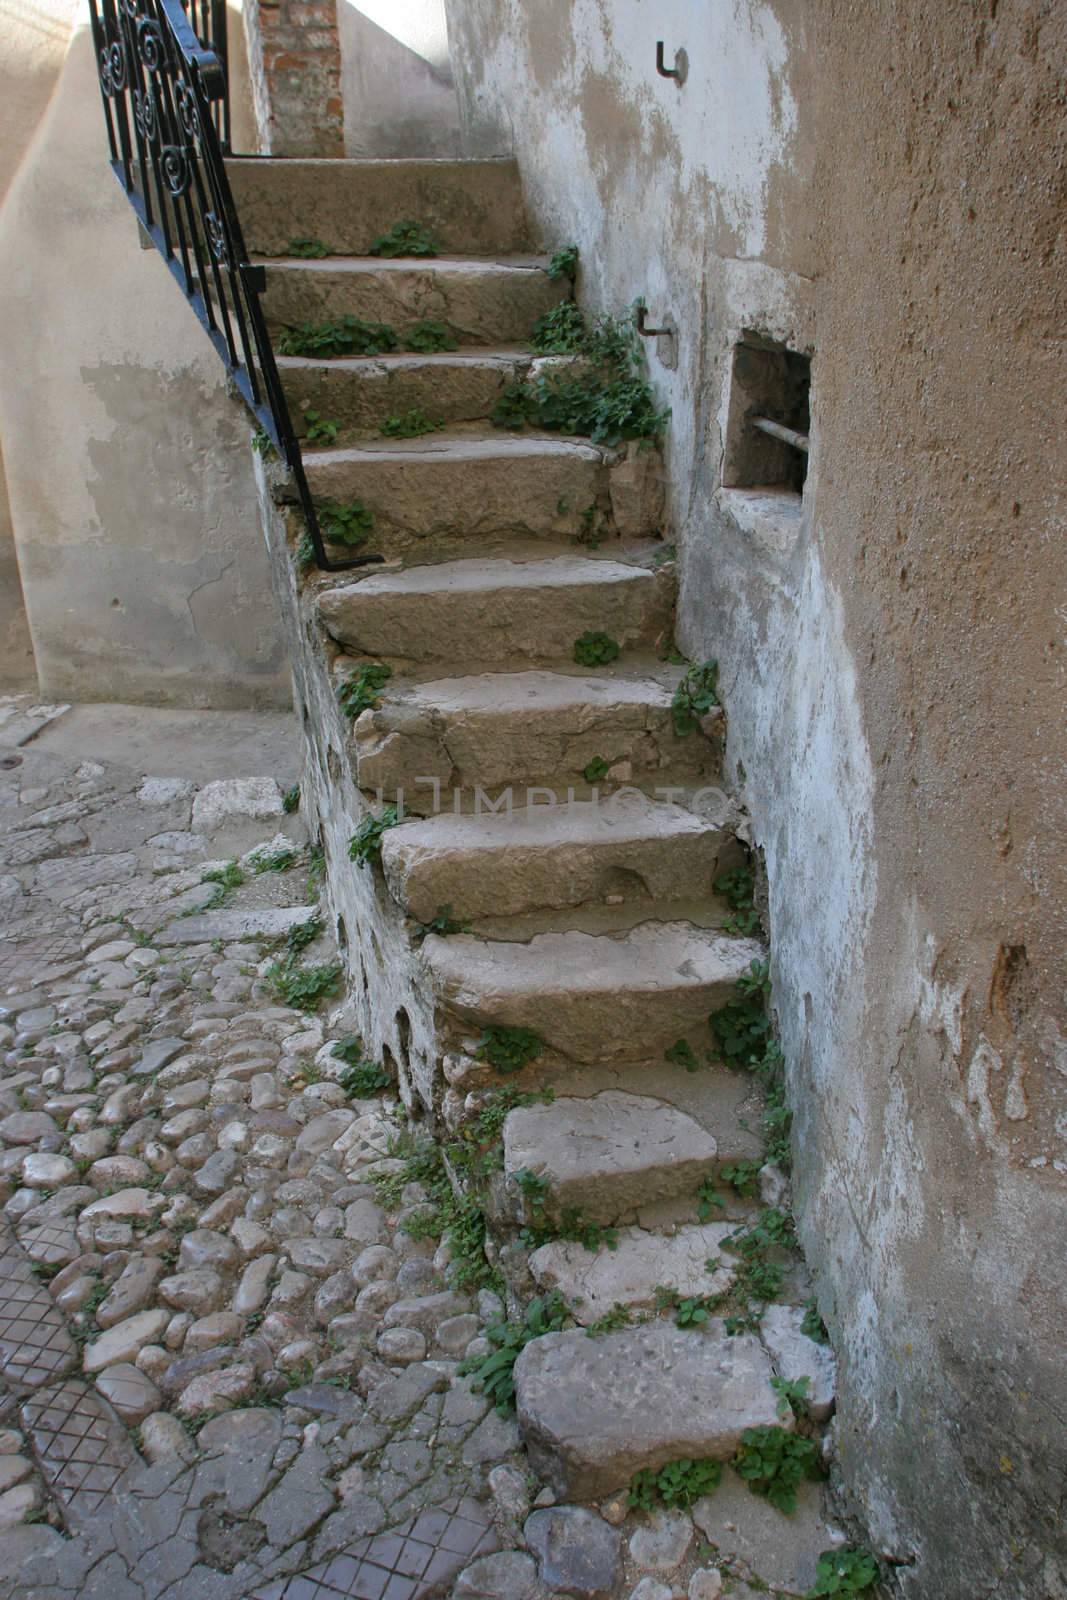 The old cracked stone stairs